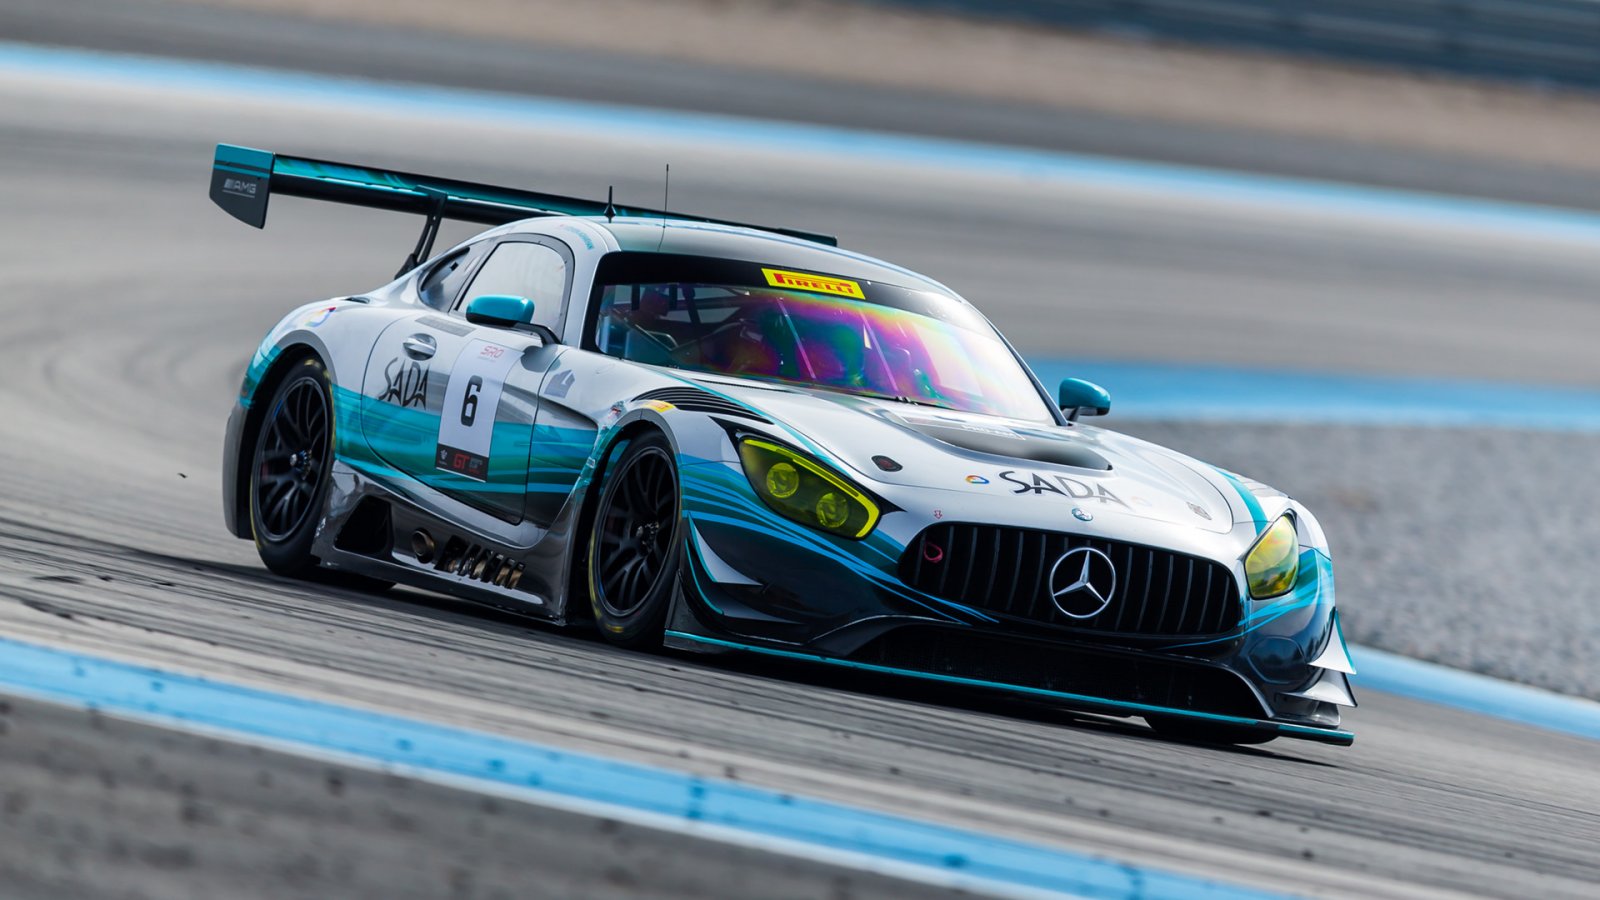 US RaceTronics Mercedes-AMG GT3 and Steven Aghakhani Win First Race of Inaugural Winter Invitational Series